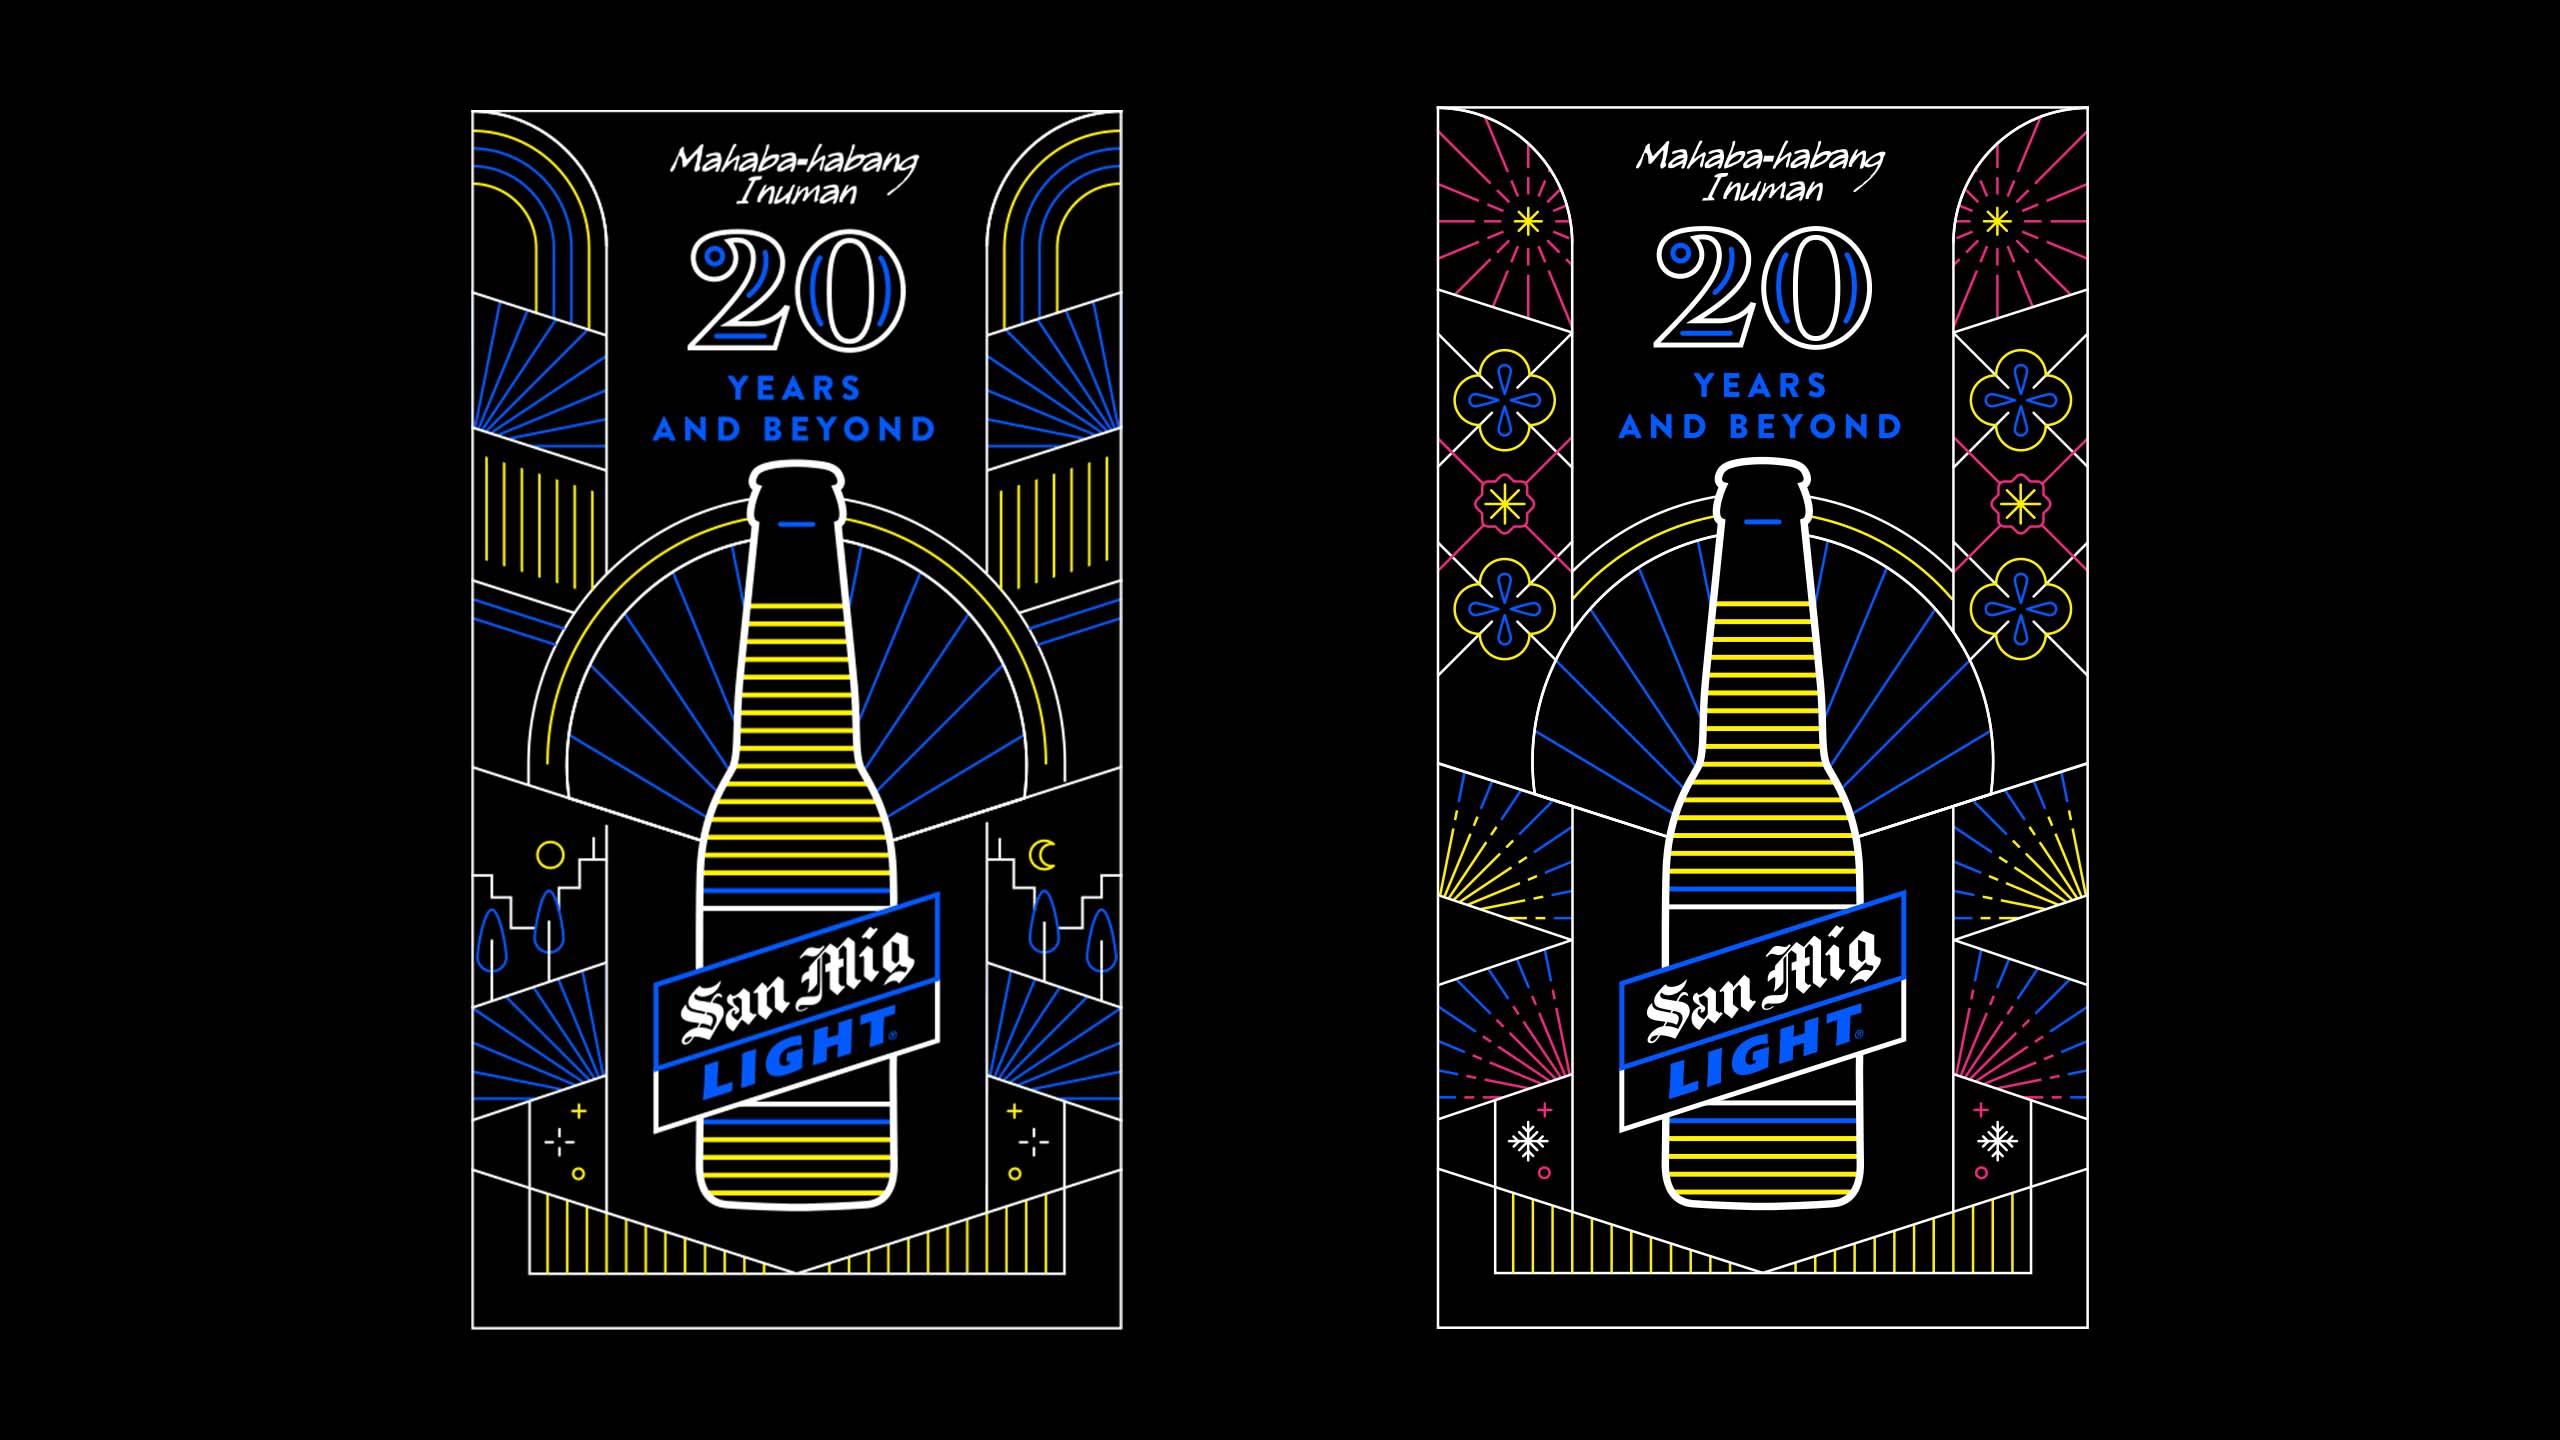 Neon signage design for Filipino beer brand San Miguel Brewery